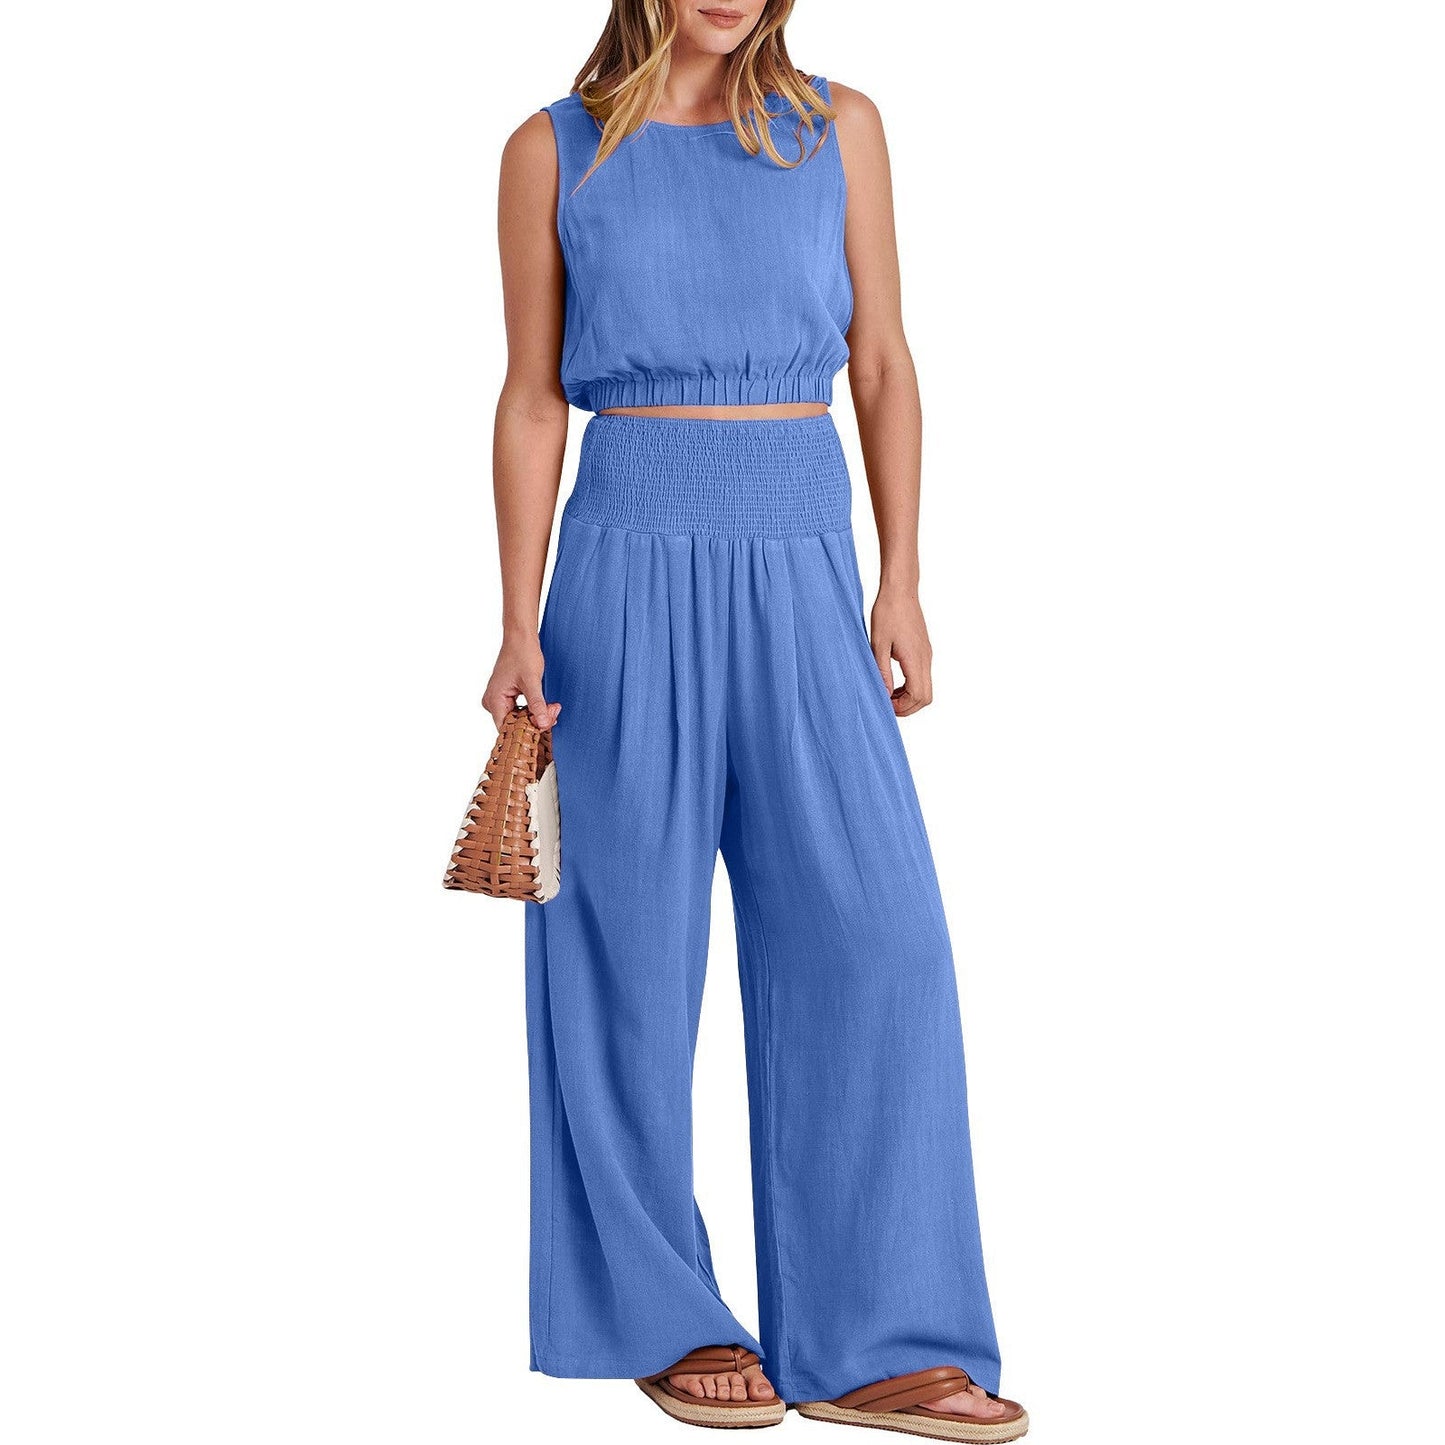 NTG Fad SUIT 898# Blue 33 / S Sleeveless Top and Pants Set